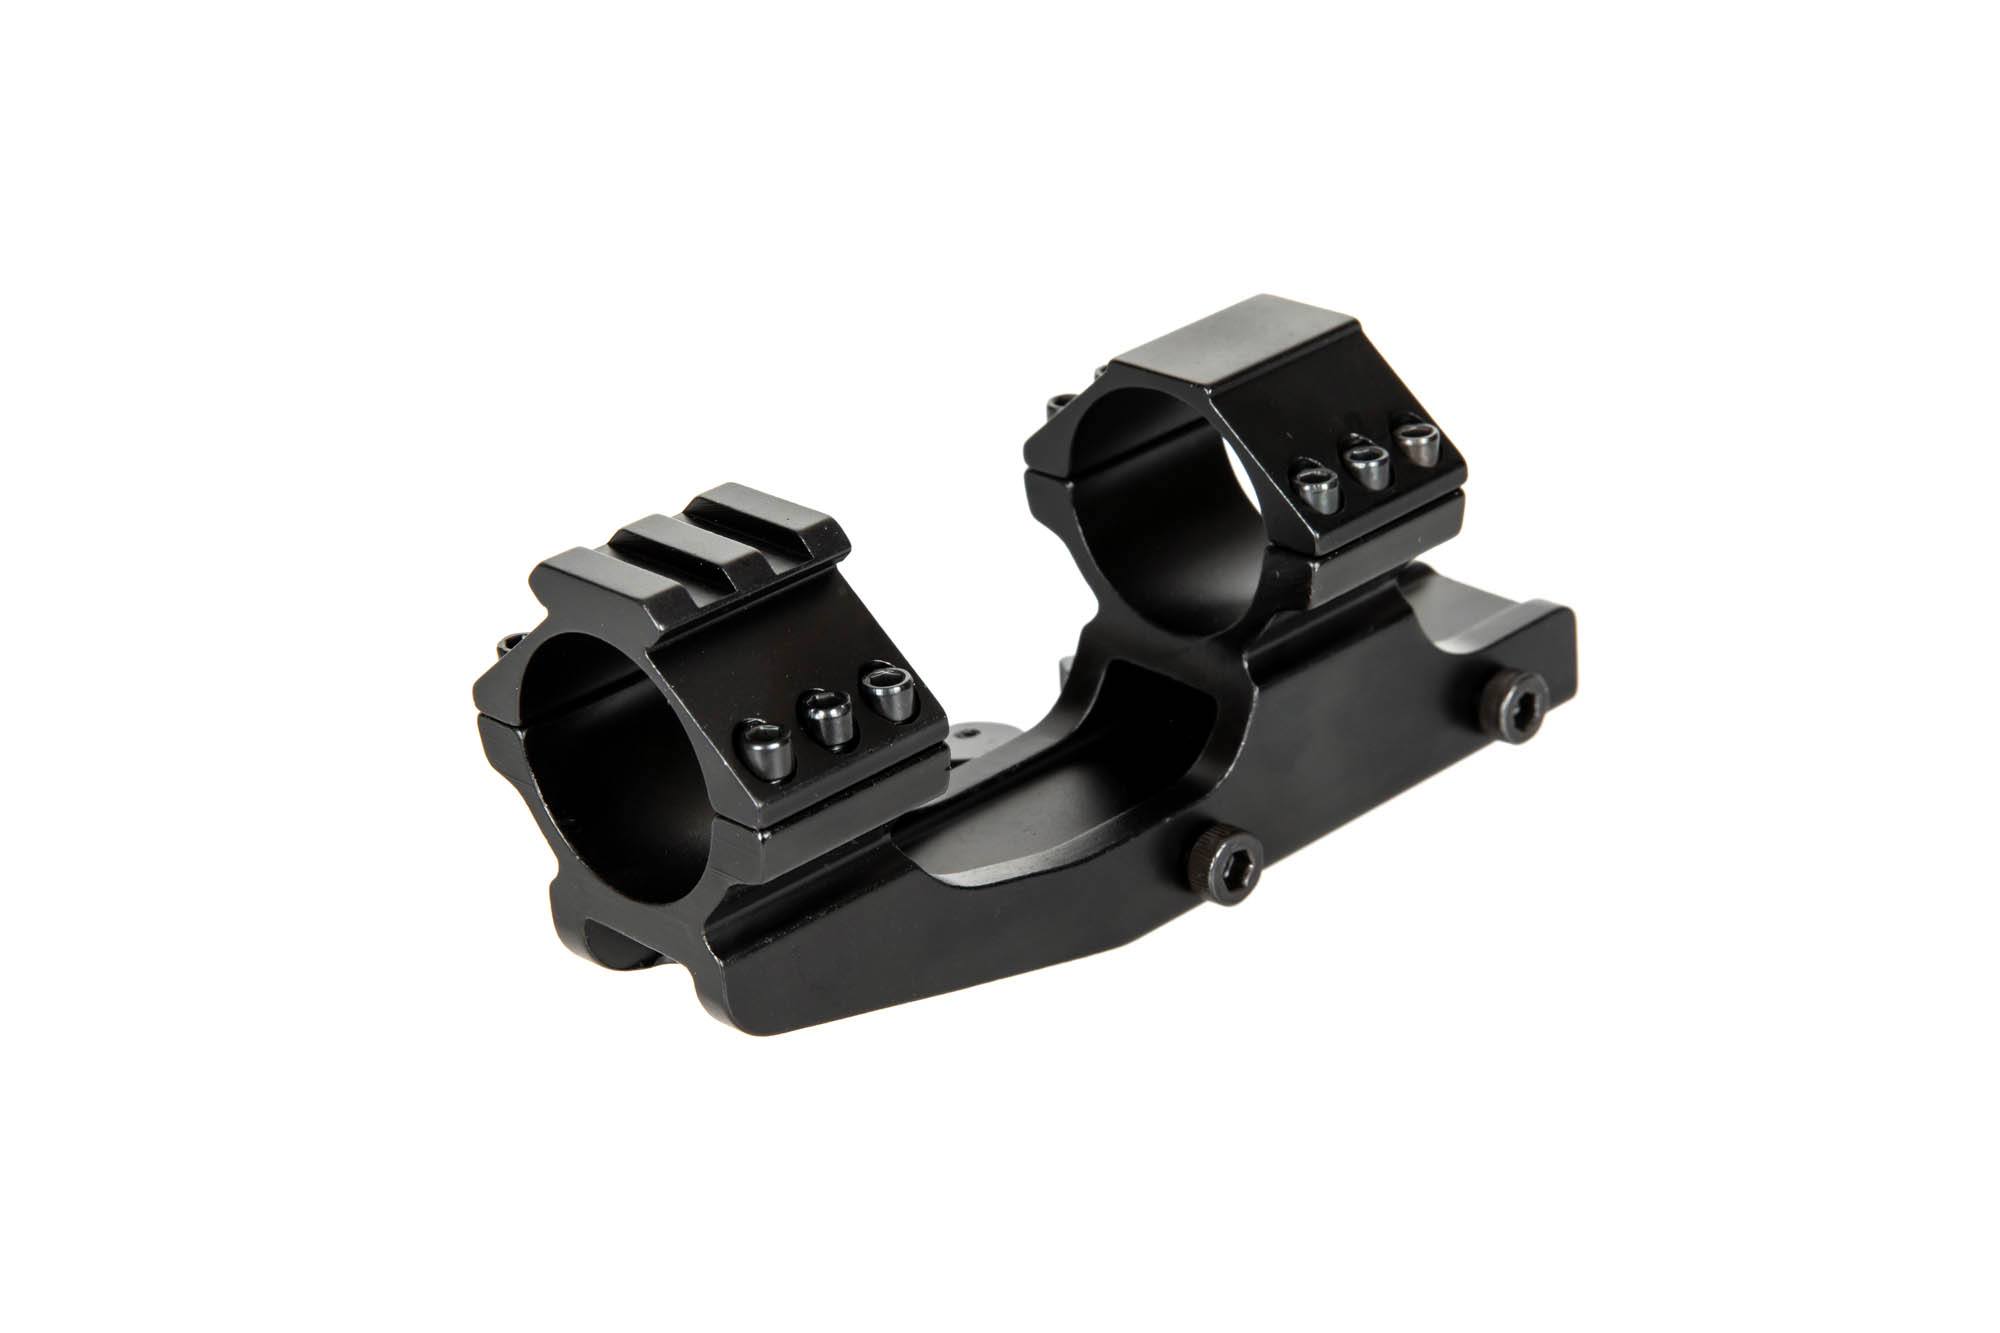 One Piece 30mm QD Mount for RIS / Picatinny